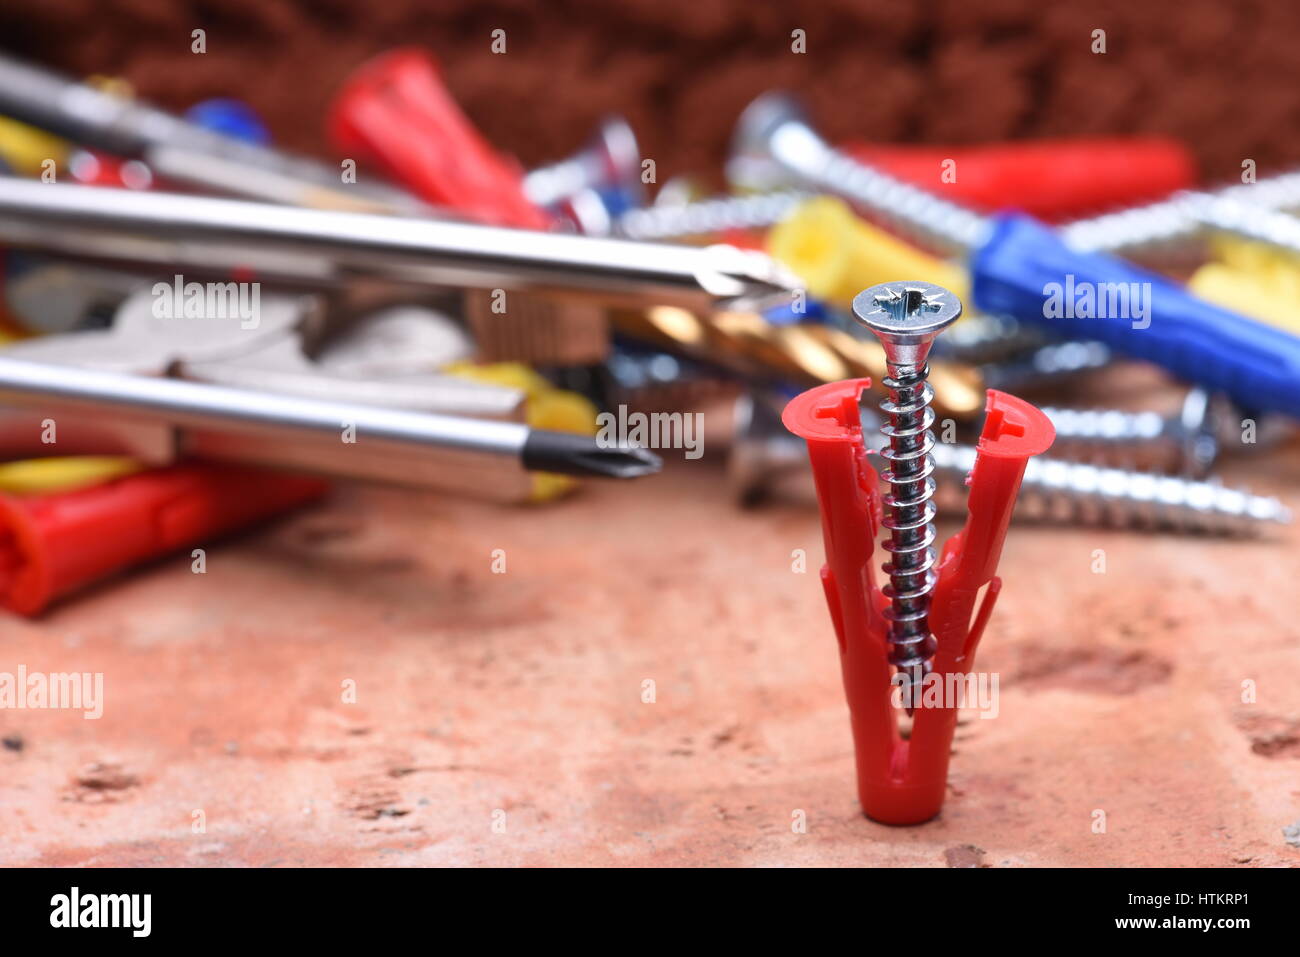 Screws plasctic dowels and tool on brick background close-up Stock Photo